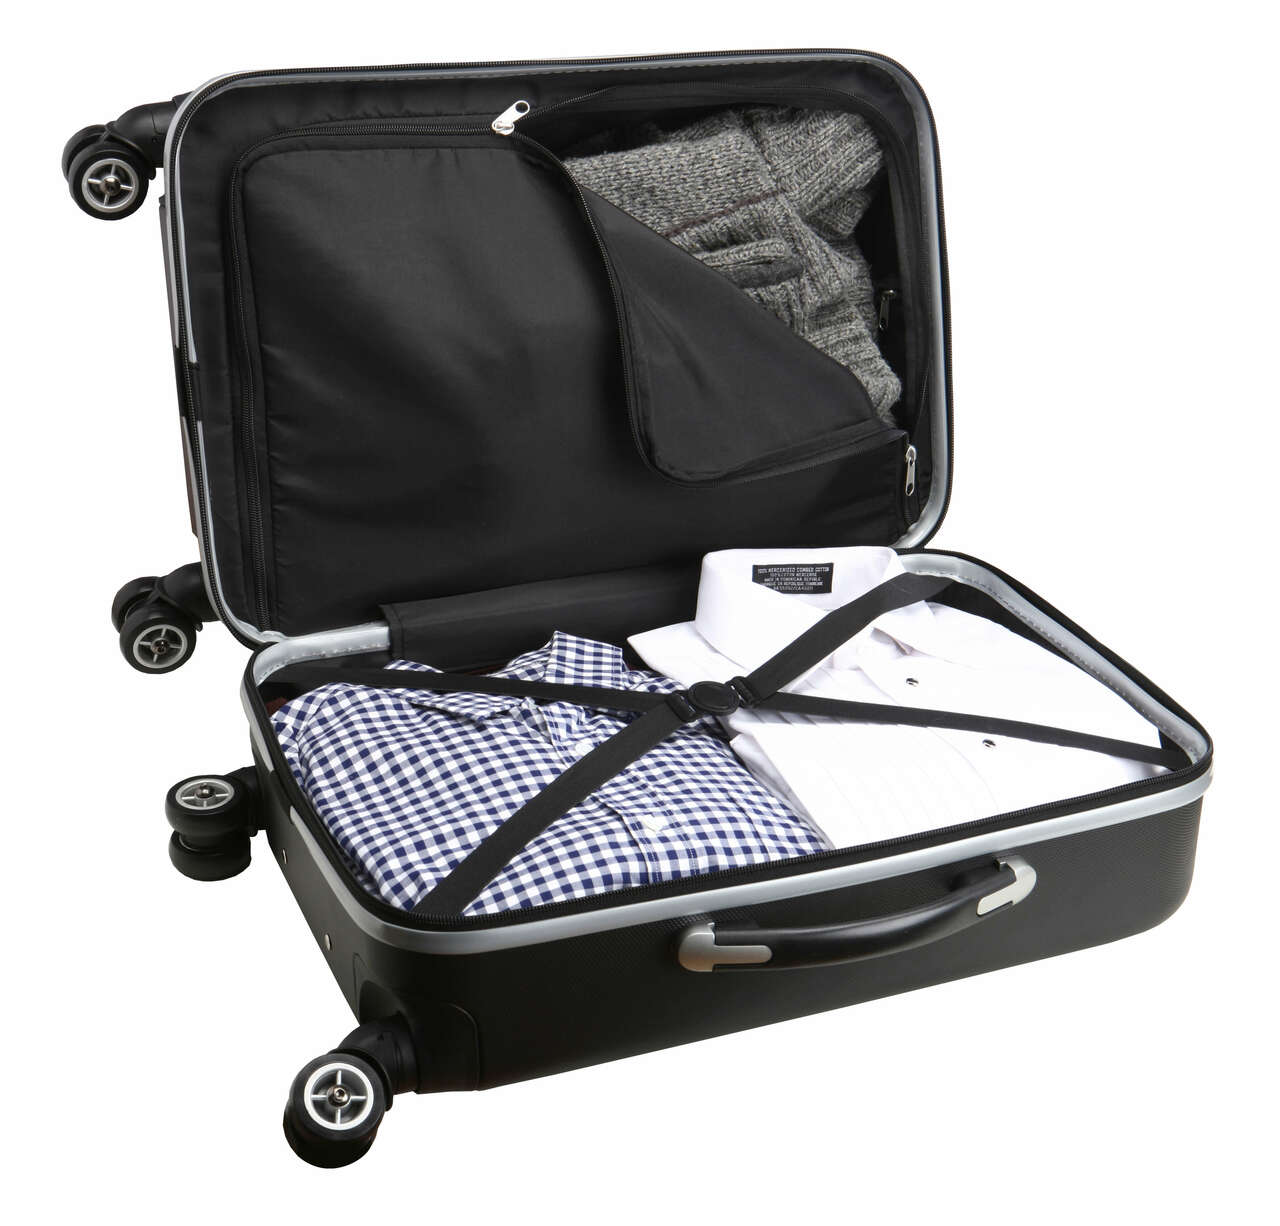 Providence College 20" Hardcase Luggage Carry-on Spinner